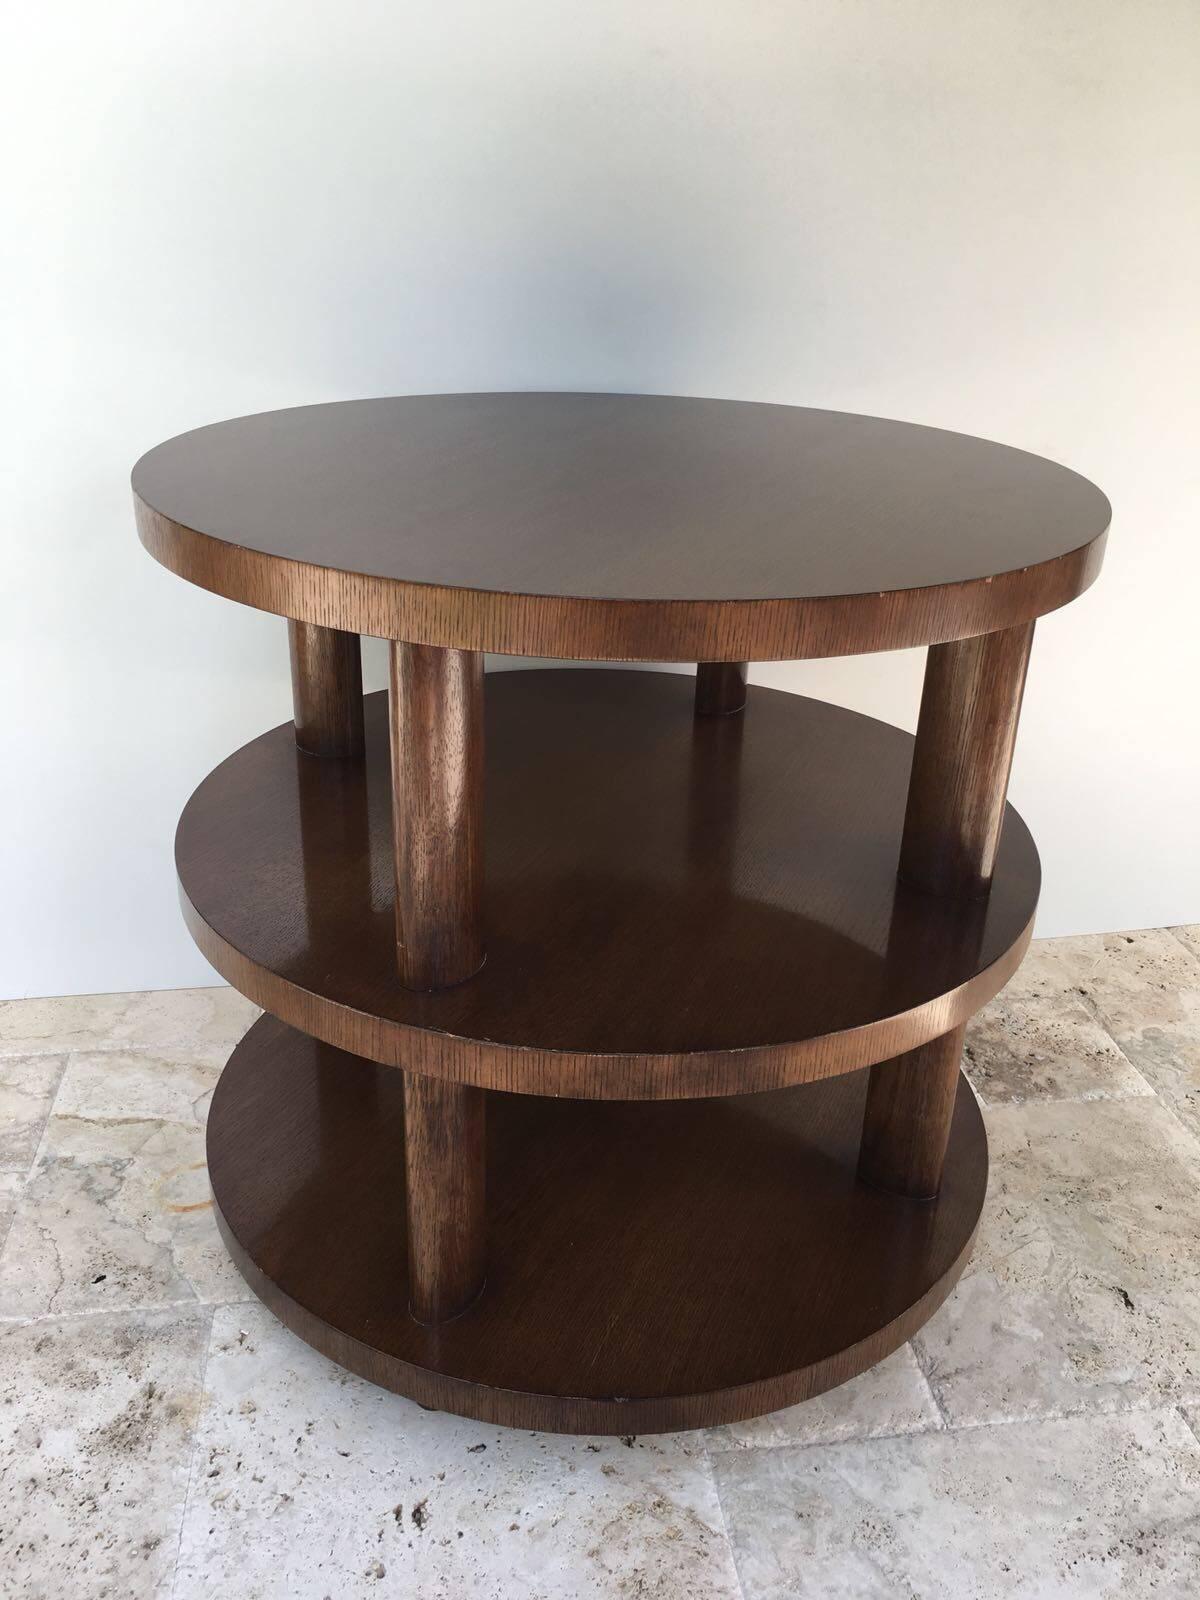 Art Deco Barbara Barry Occasional Table for Baker